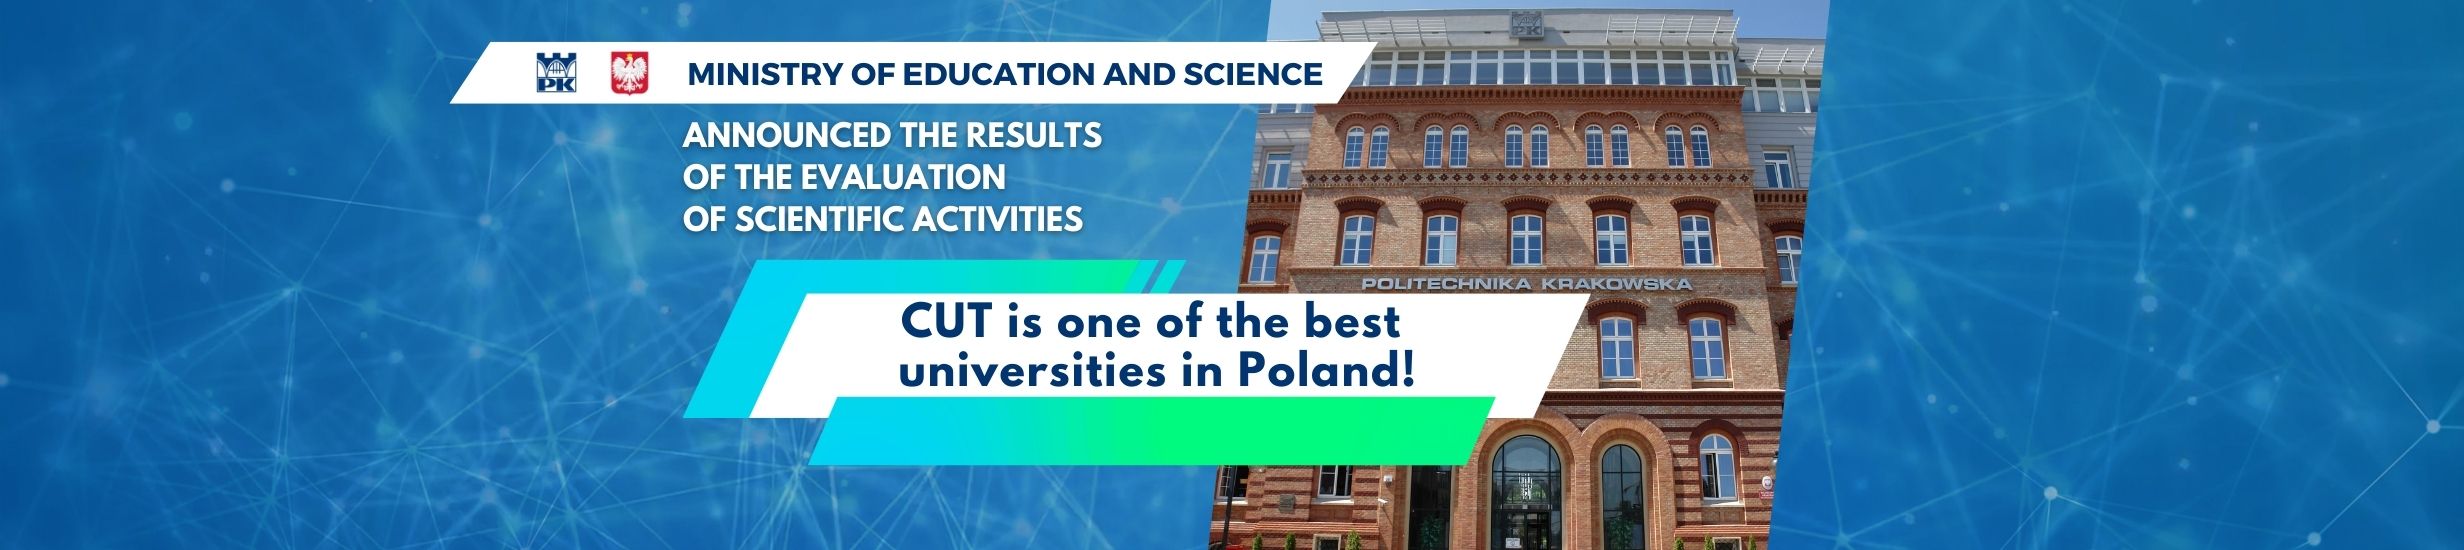 Cracow University of Technology is one of the best universities in Poland